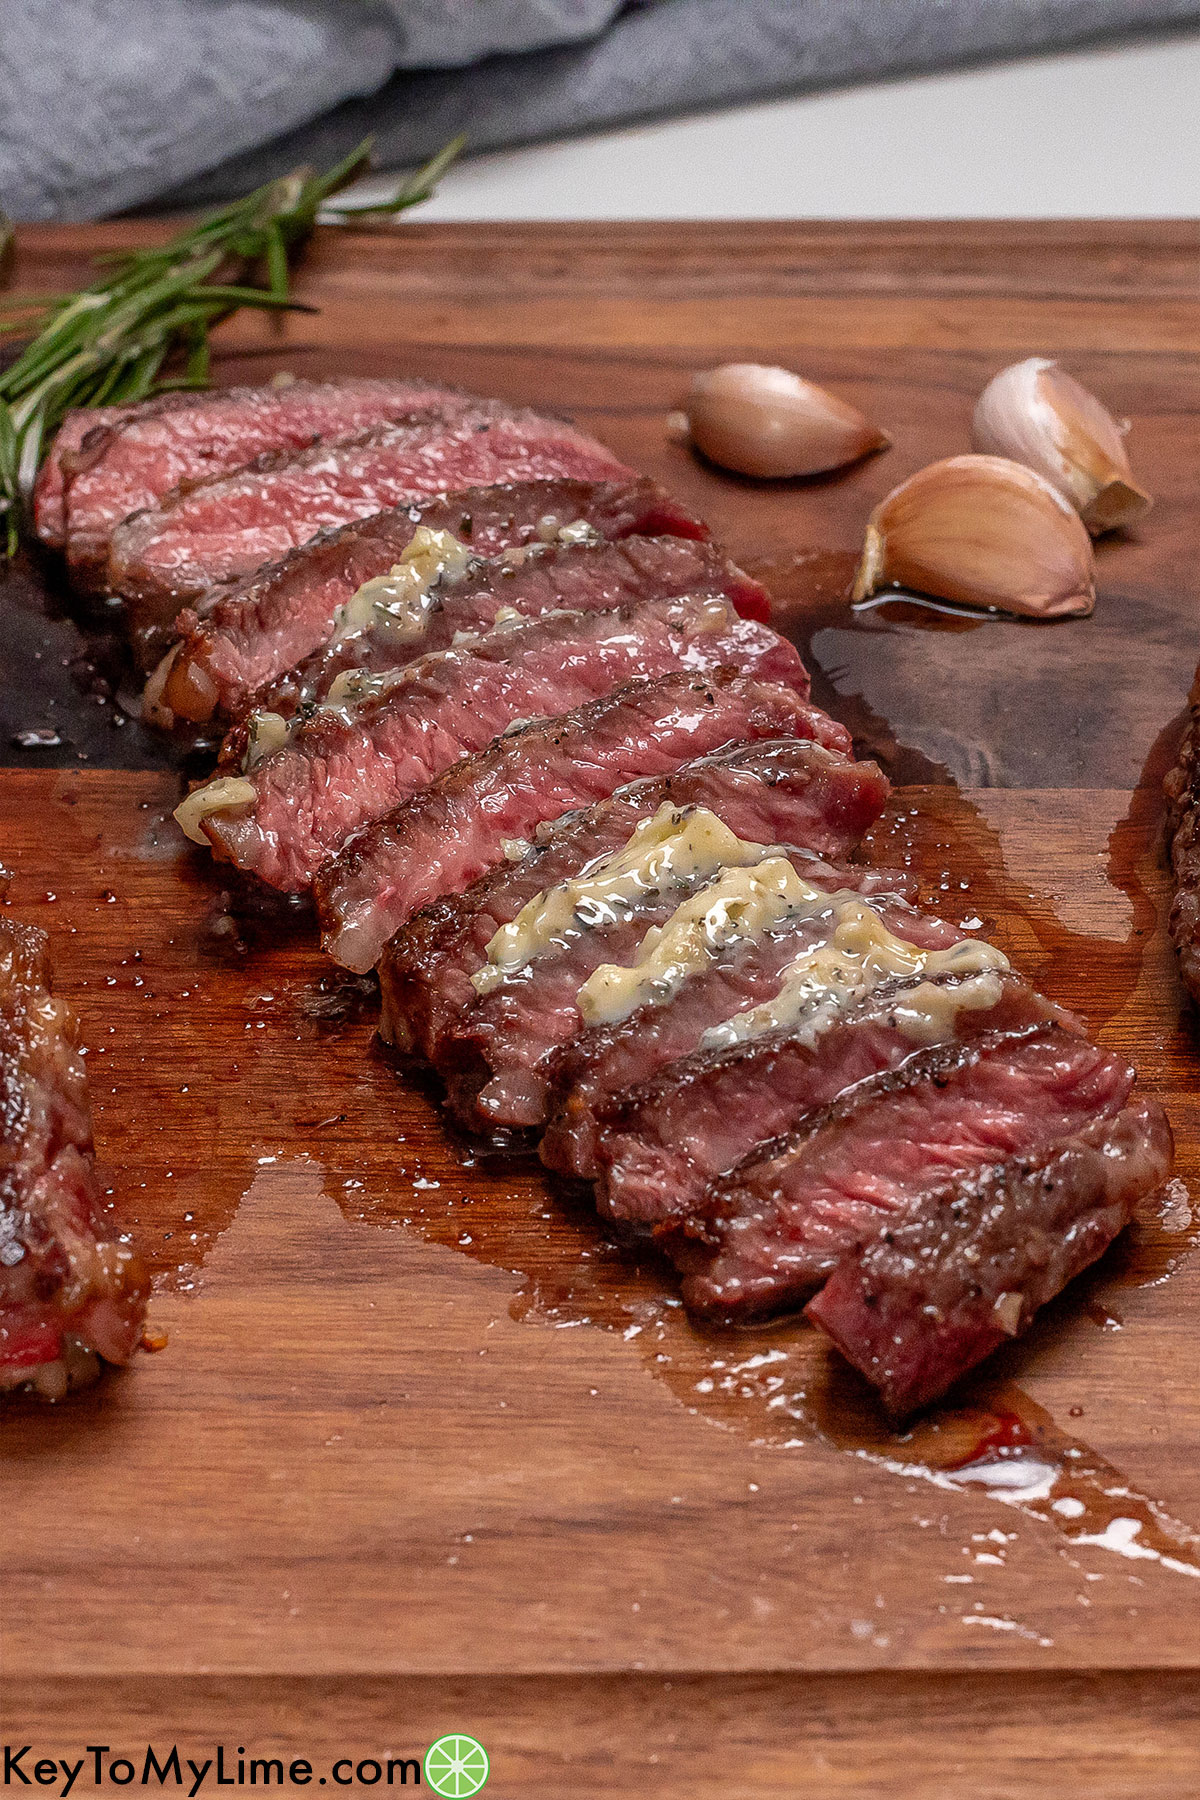 An angled image of sliced steak resting on a cutting board with garlic to the side.